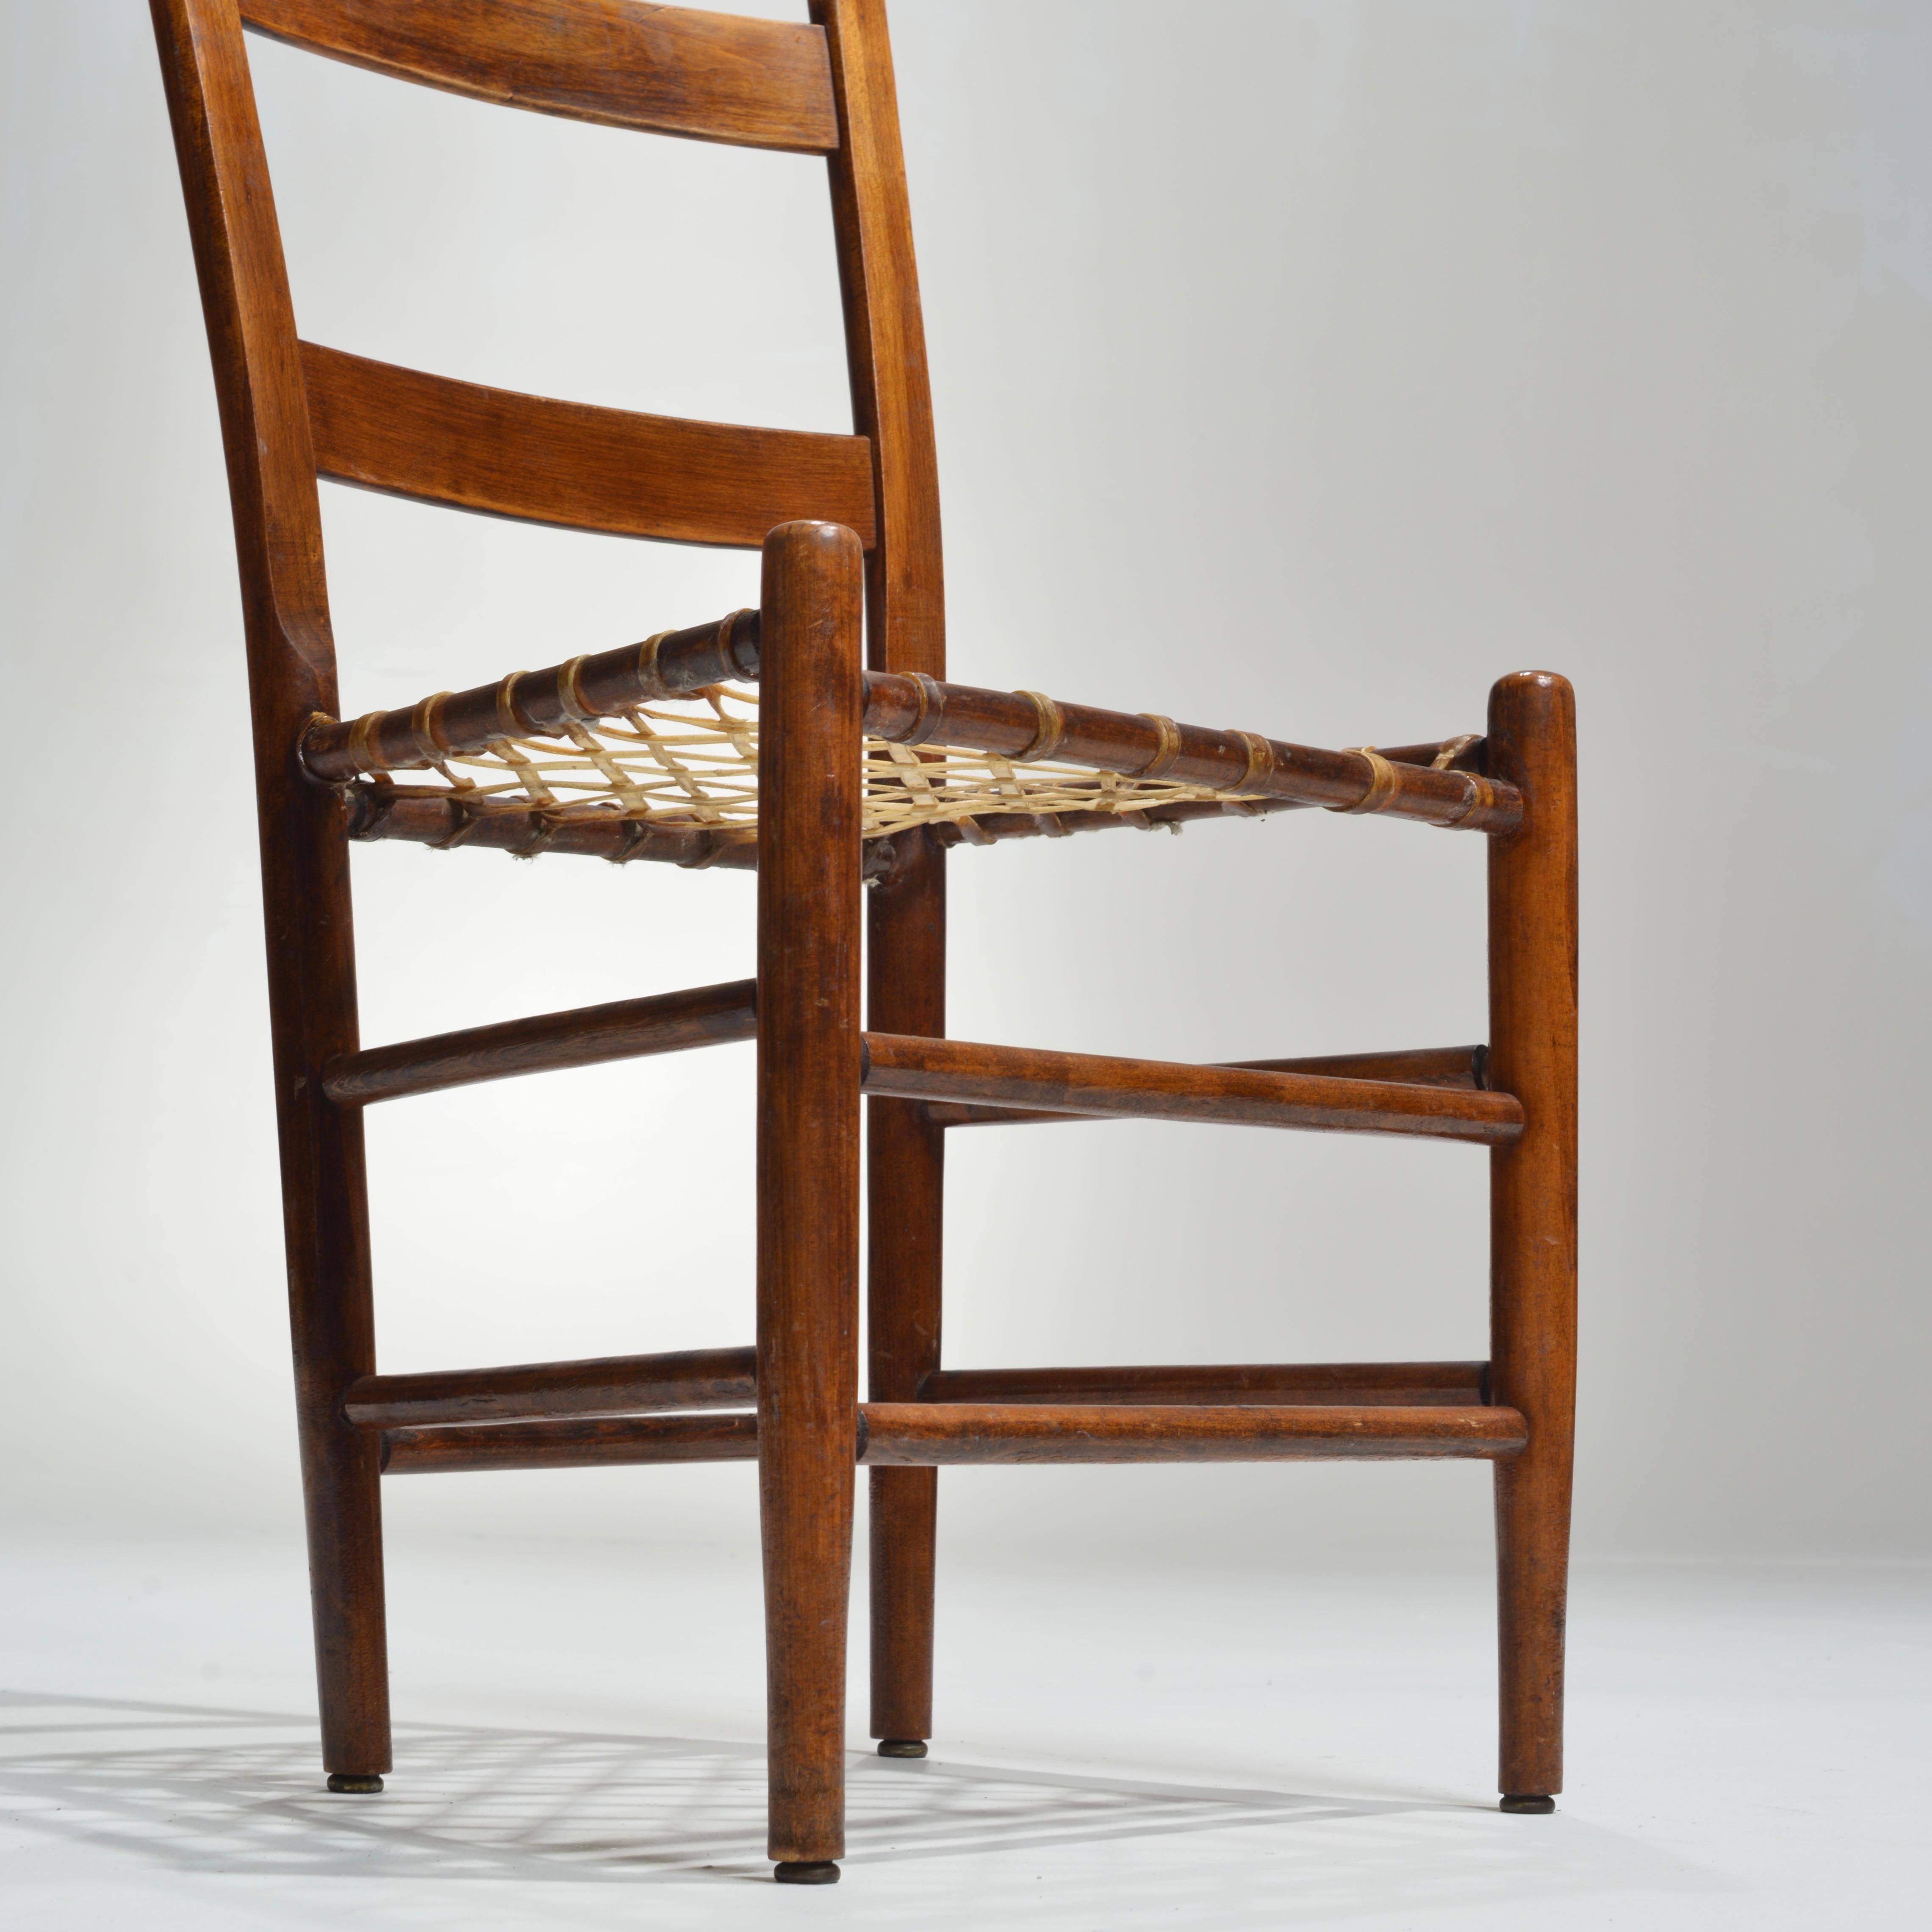 Leather 19th Century Rawhide Primitive Chairs, c. 1850 For Sale